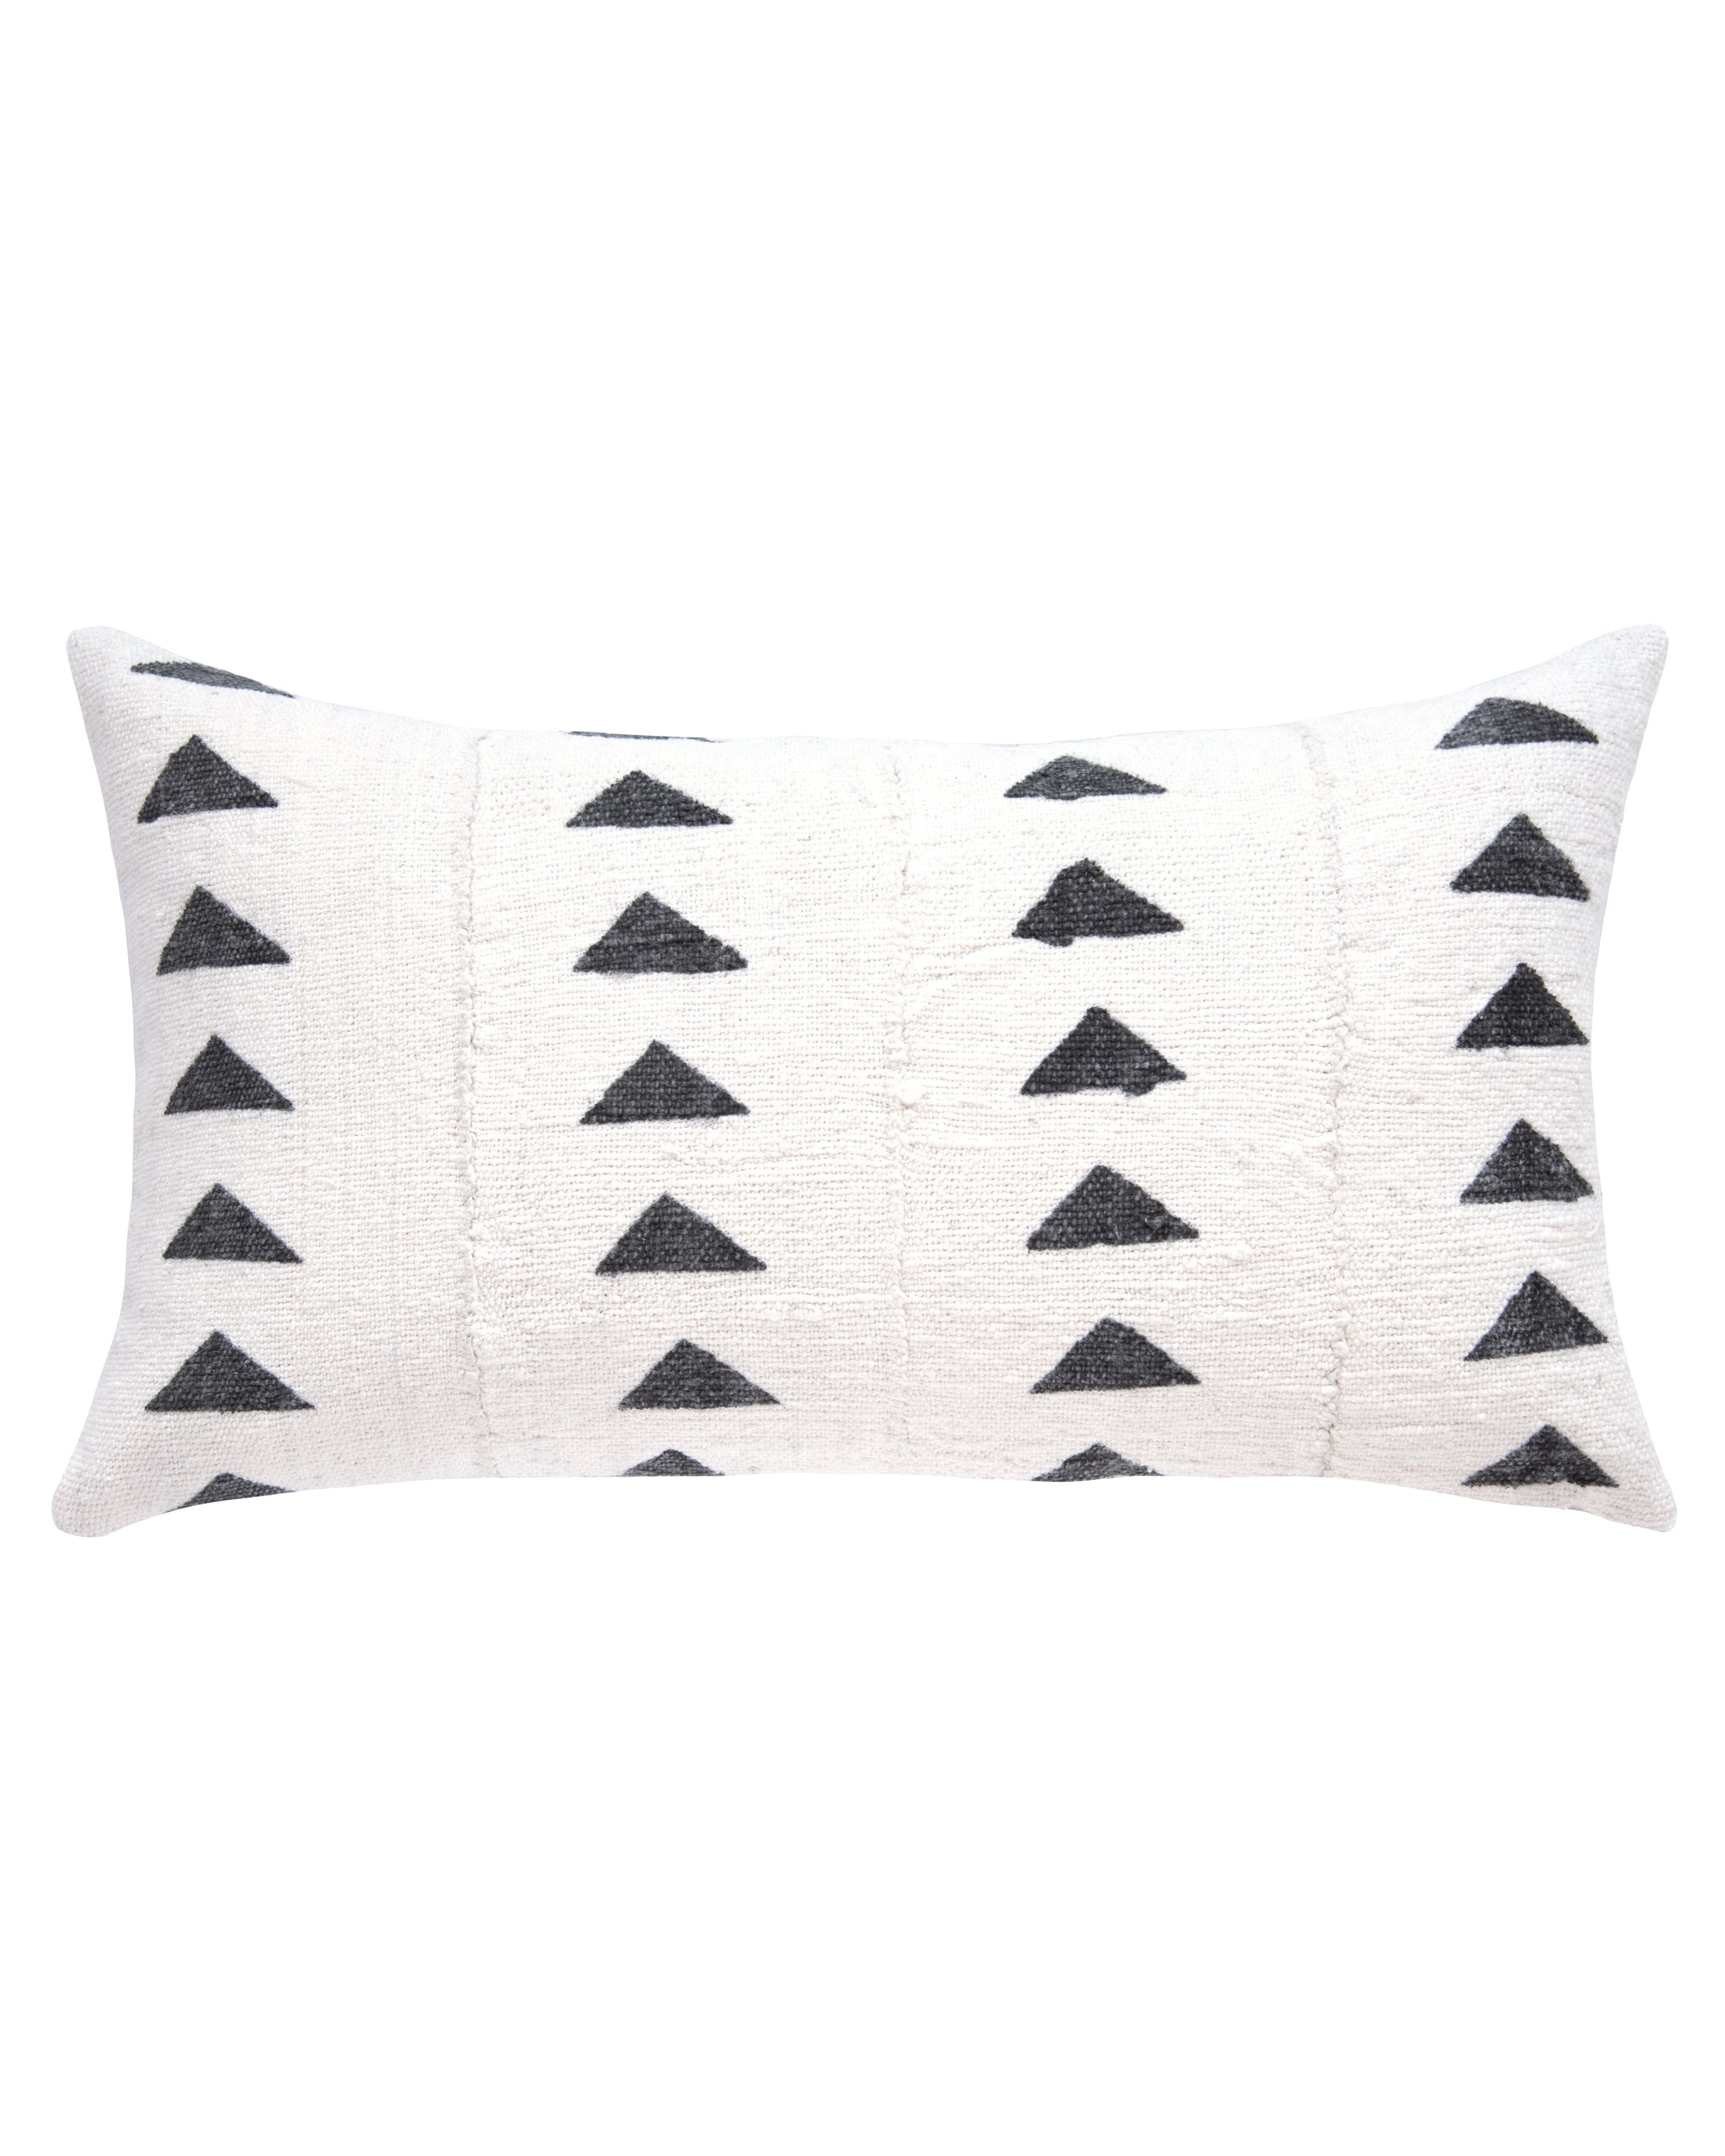 triangle mud cloth lumbar pillow in white - cover only - PillowPia